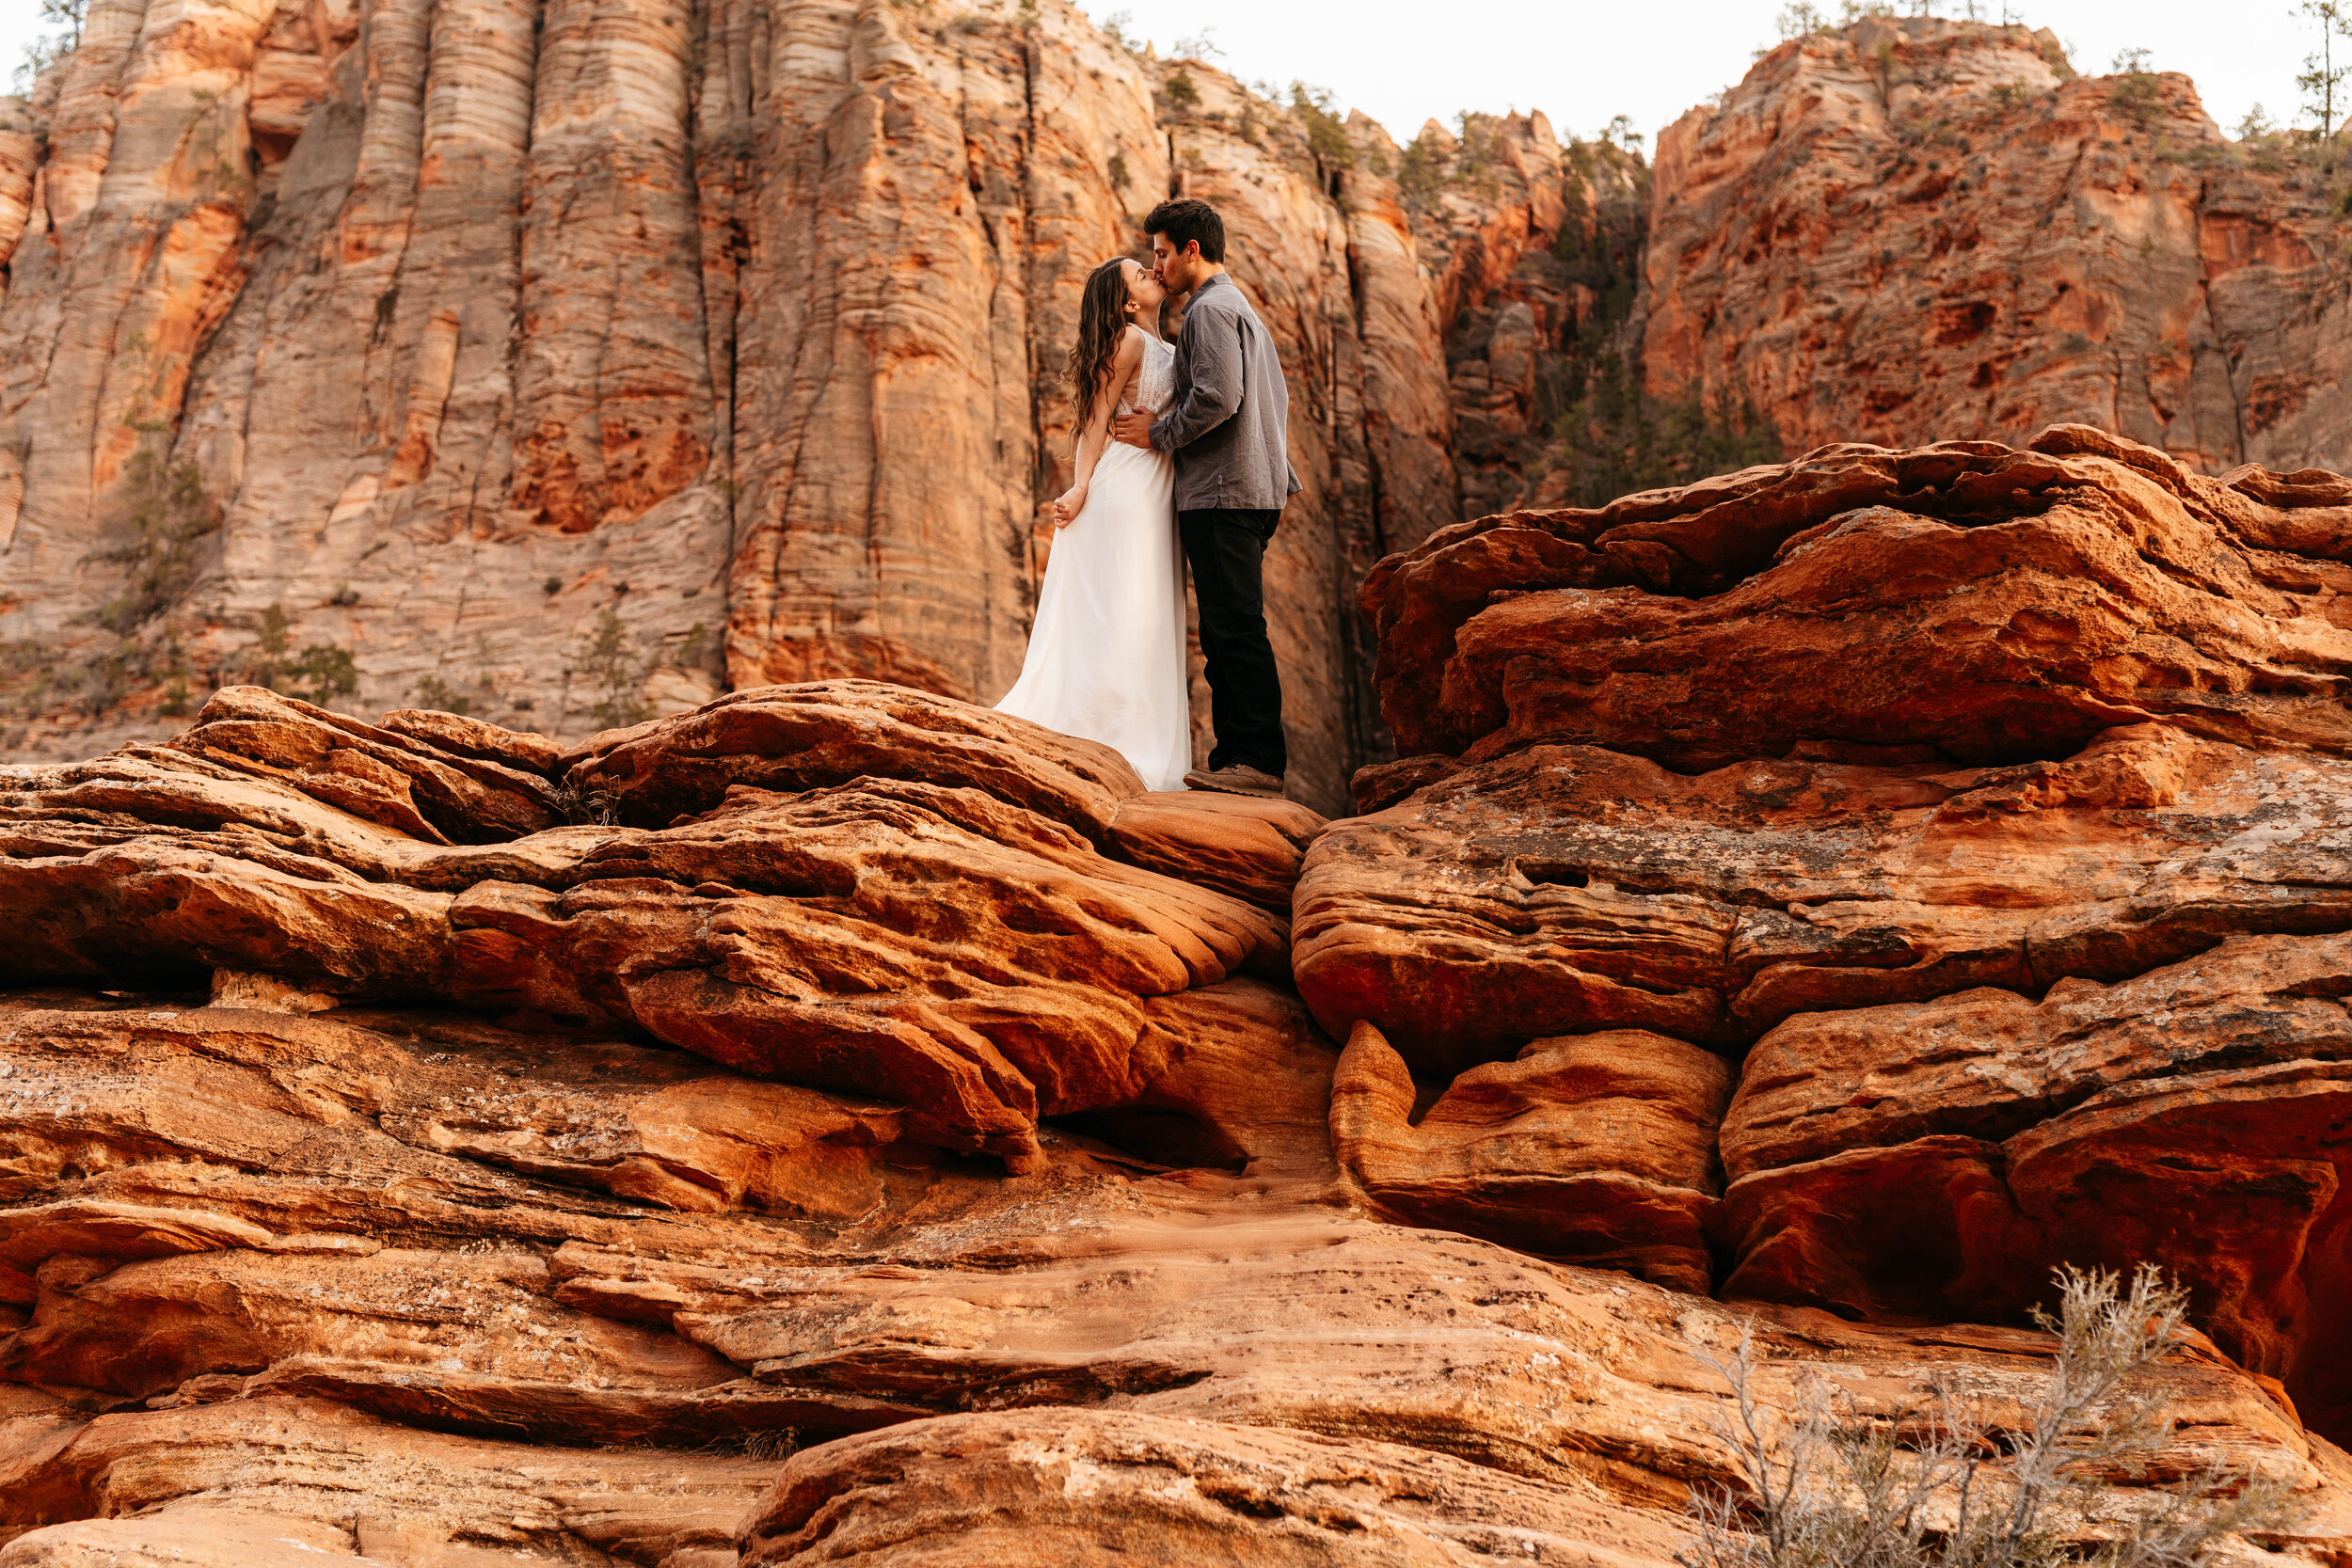 Kylee + Andrew - Zion National Park, Utah Canyon Overlook Adventure Session51.jpg